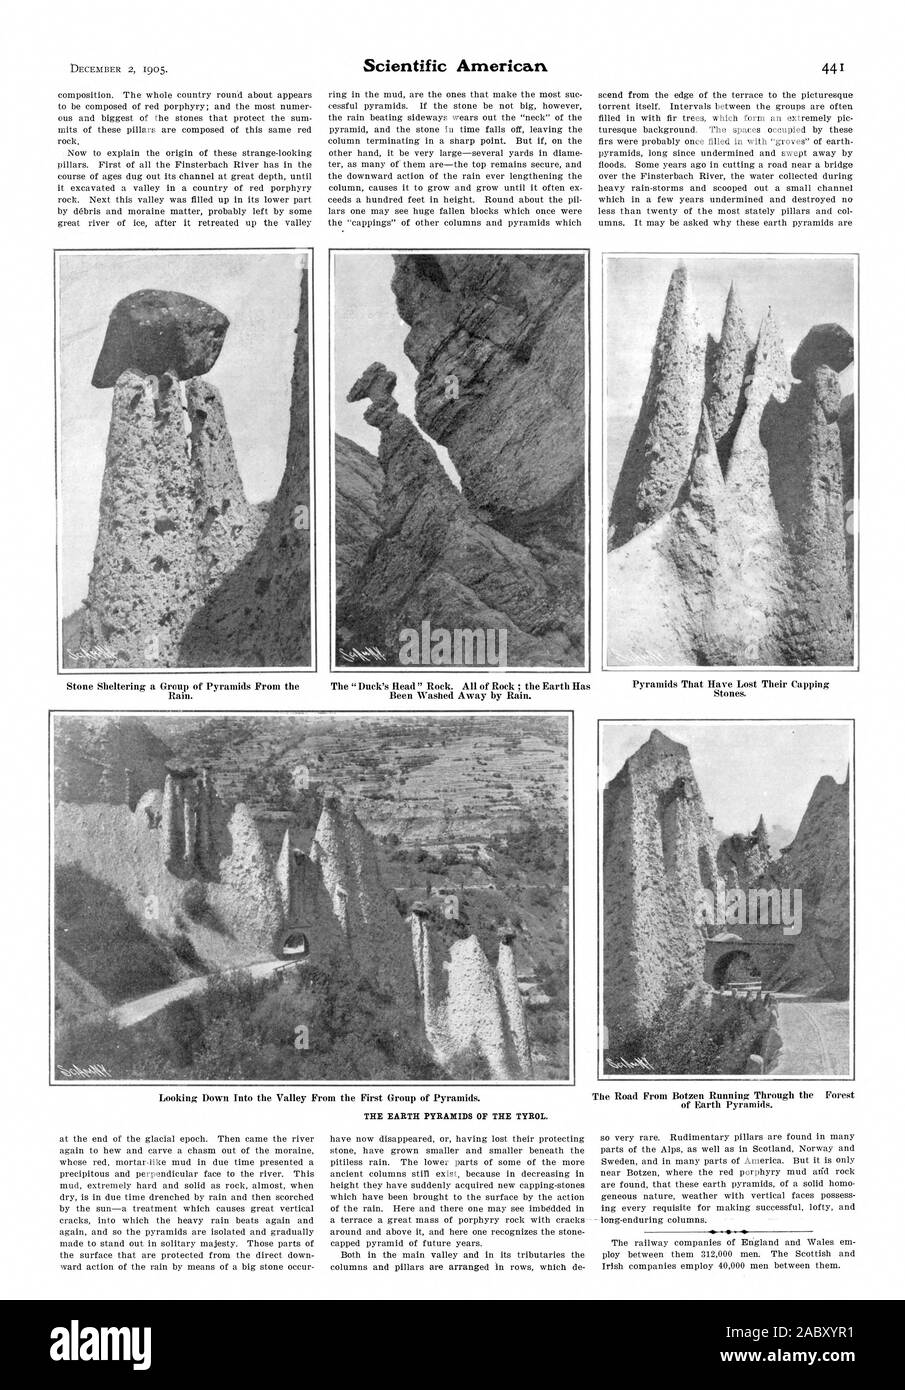 Stone Sheltering a Group of Pyramids From the Rain. The 'Duck's Head' Rock. All of Rock ; the Earth Has Been Washed Away by Rain. The Road From Botzen Running Through the Forest of Earth Pyramids., scientific american, 1905-12-02 Stock Photo